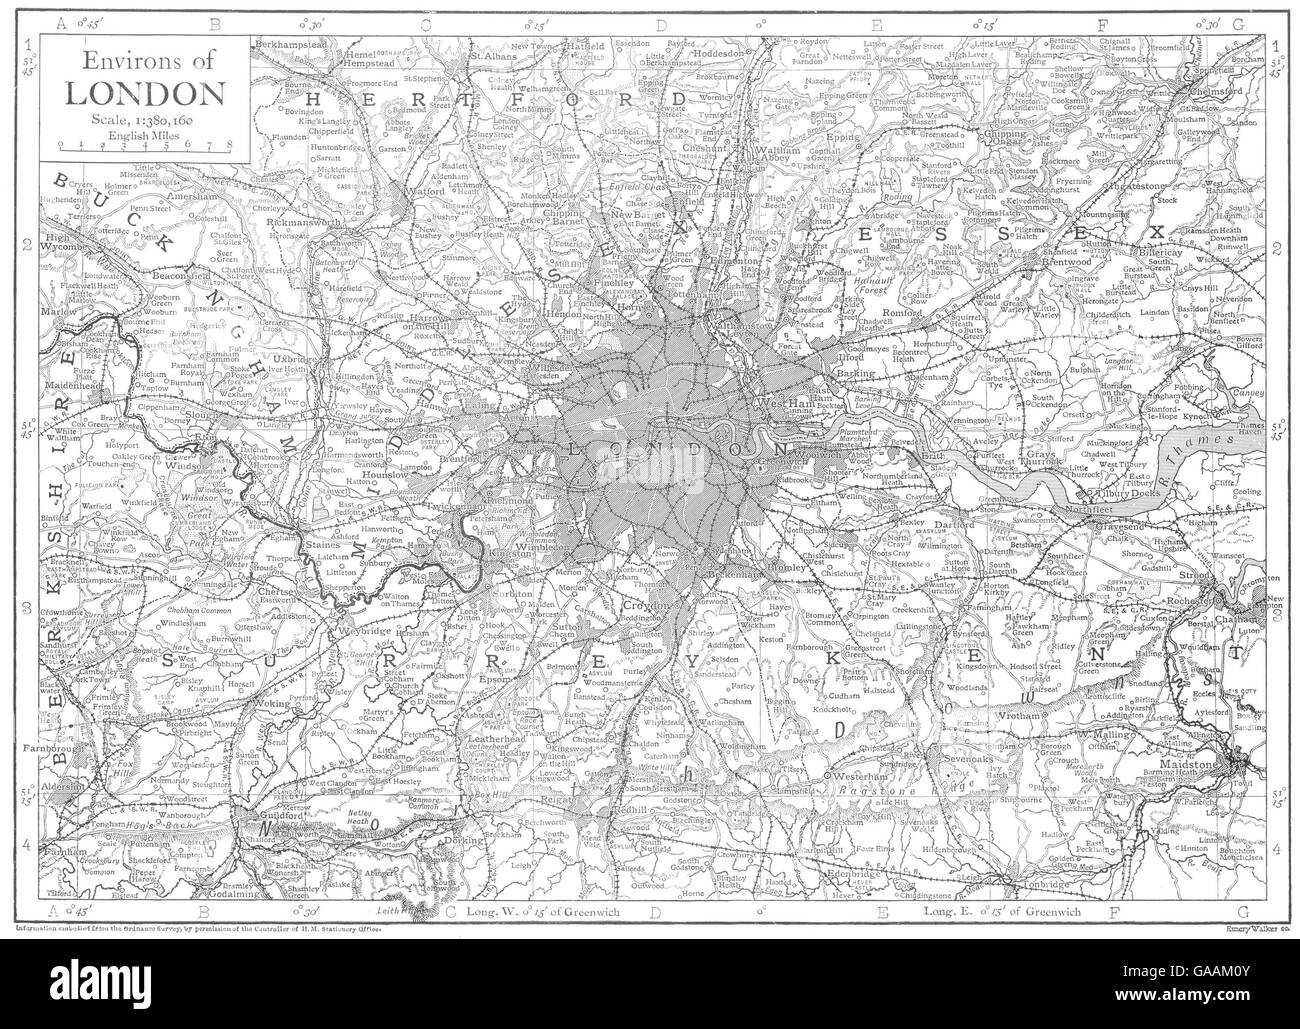 LONDON: Environs of London; Greater London, Homes counties, 1910 antique map Stock Photo